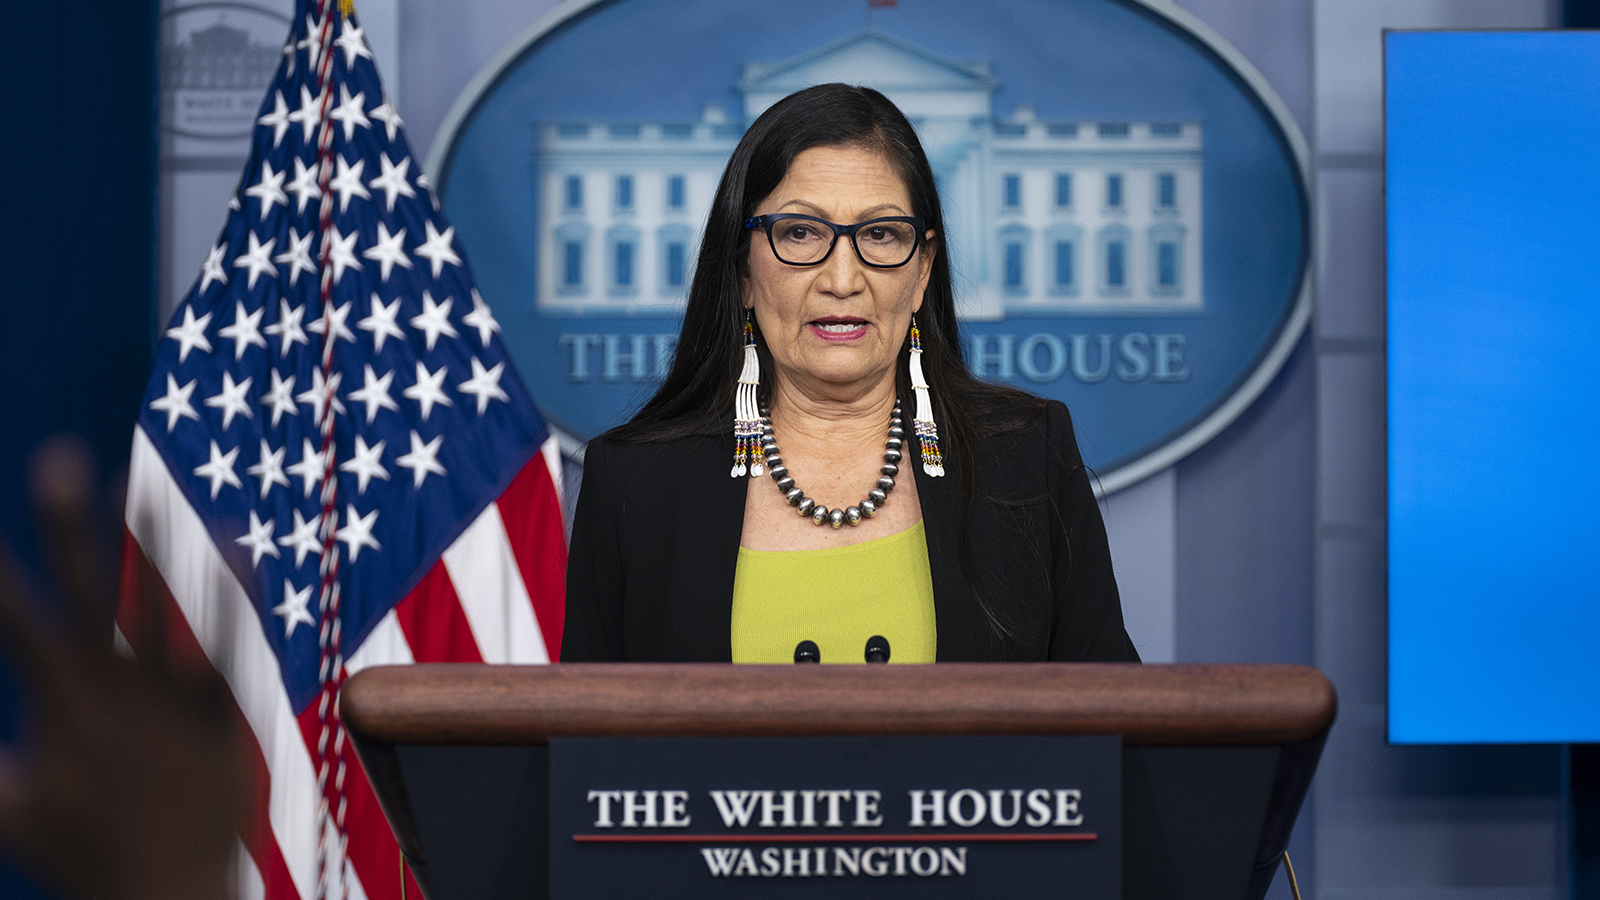 In this April 23, 2021, file photo, Interior Secretary Deb Haaland speaks during a news briefing at the White House in Washington. On June 22, 2021, Haaland and other federal officials announced steps that the federal government plans to take to reconcile the legacy of boarding school policies on Indigenous families and communities across the U.S. (AP Photo/Evan Vucci, File)